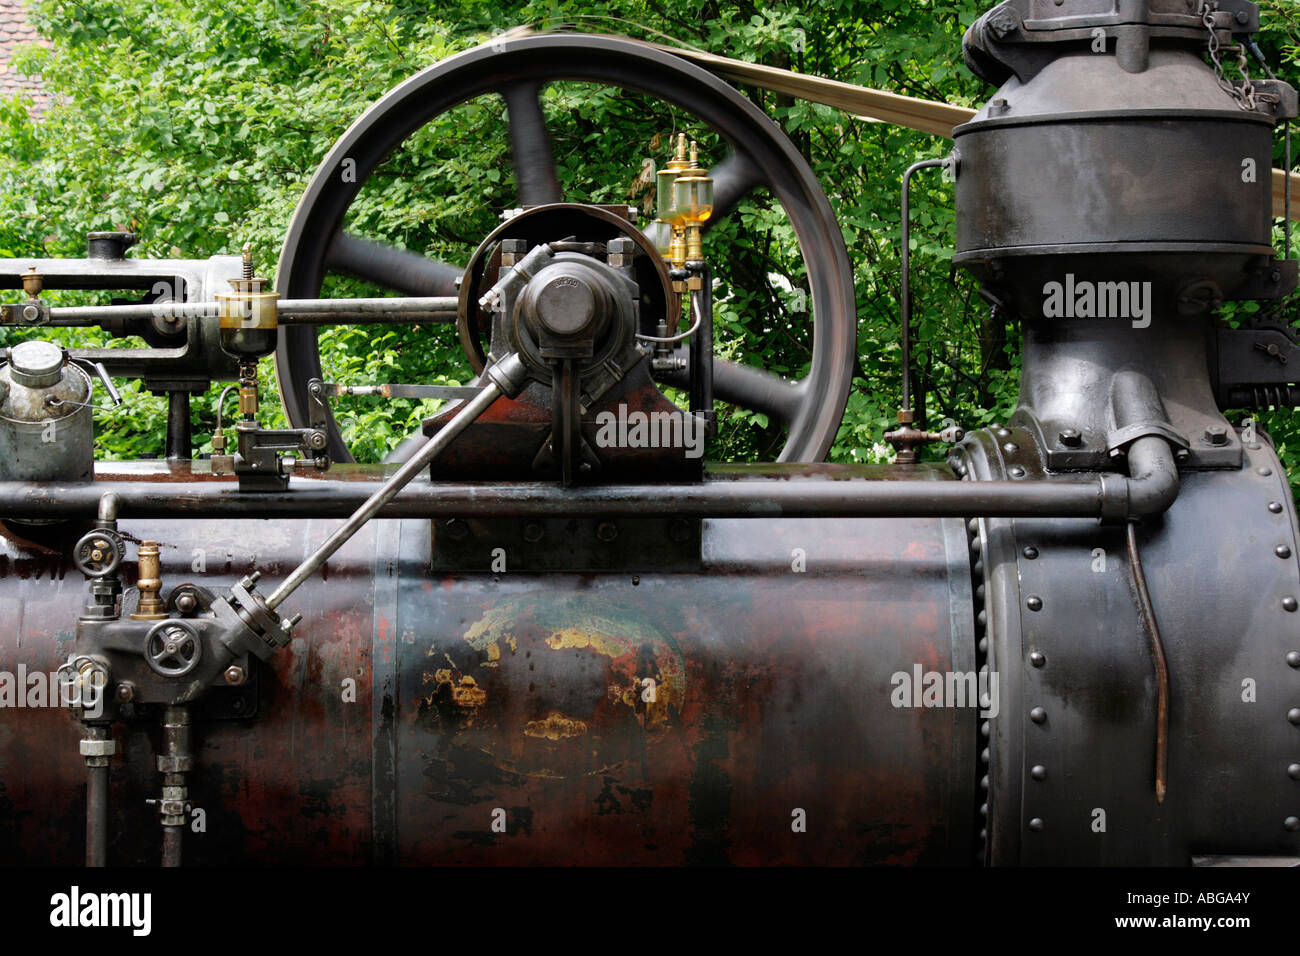 Flywheel, valves and rods of a historic steam engine Stock Photo